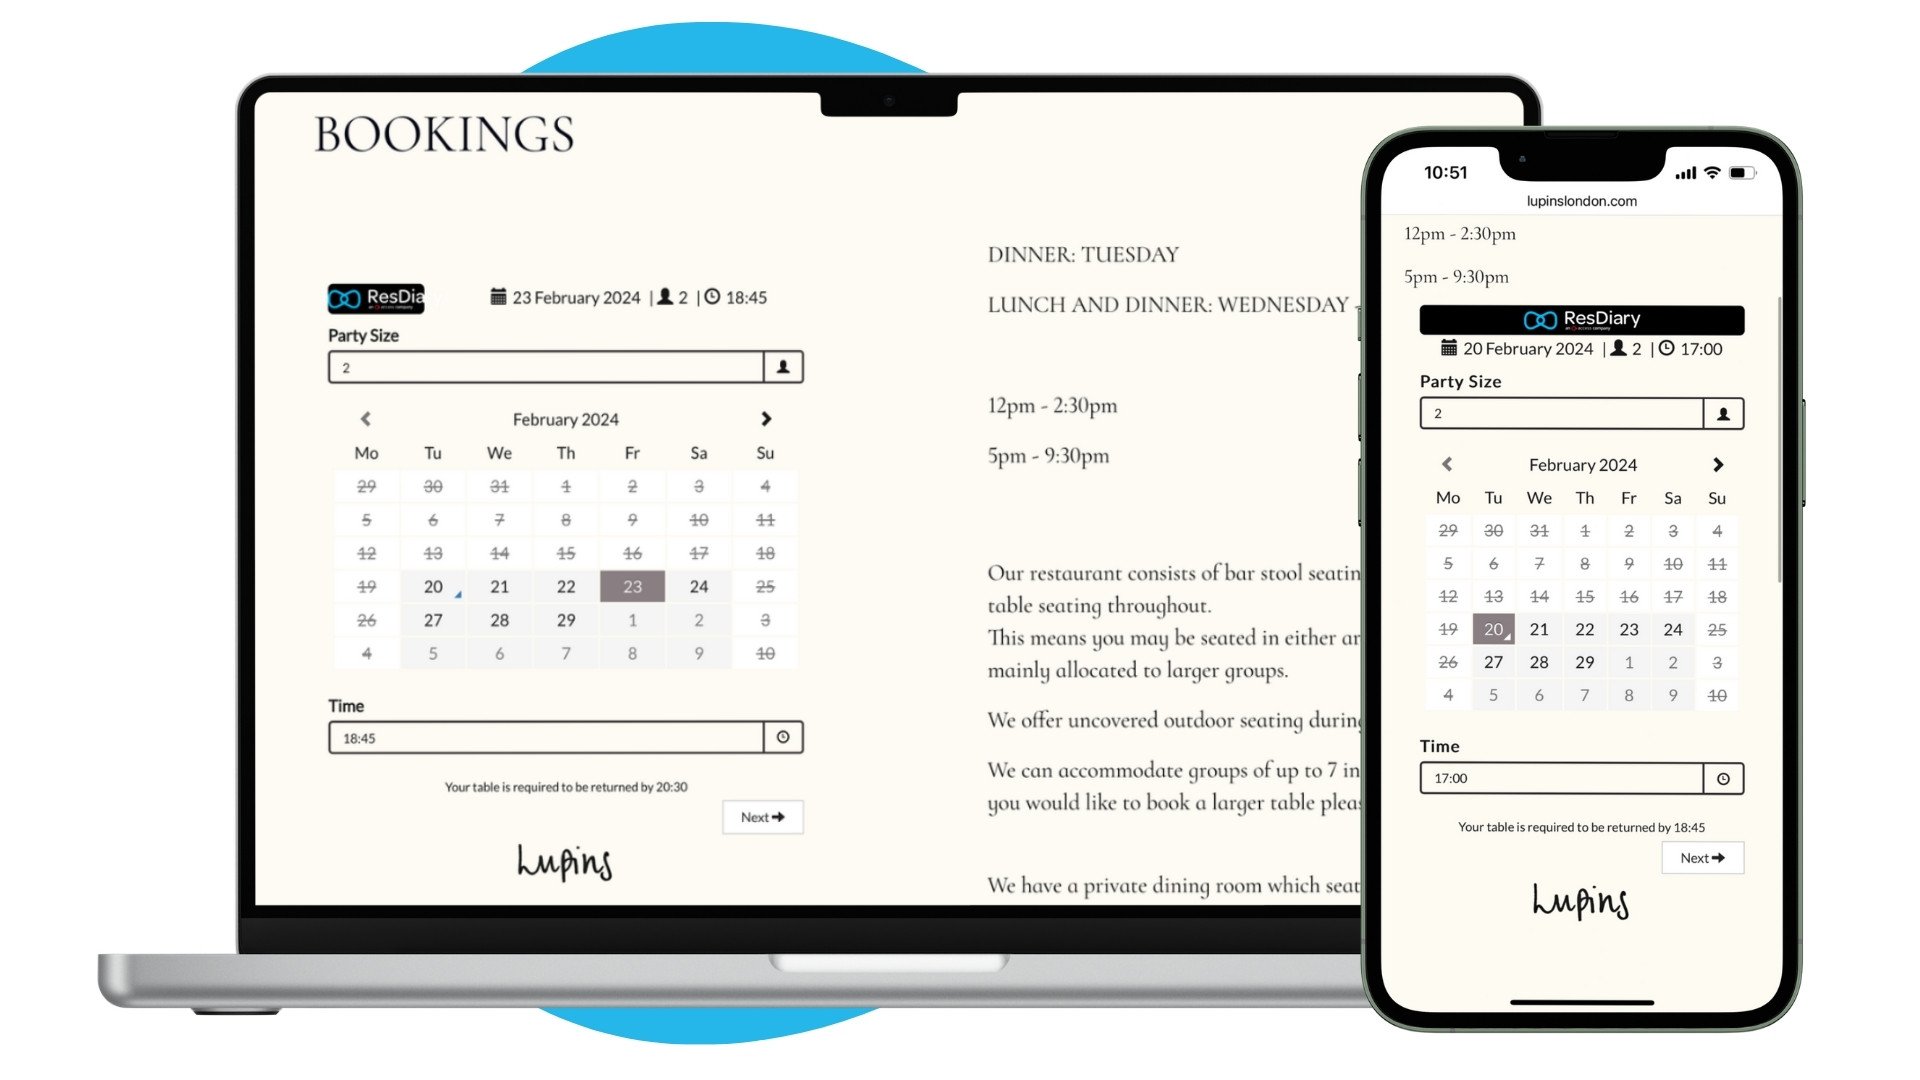 Lupins London Restaurant Booking Widget Example on Laptop and iPhone